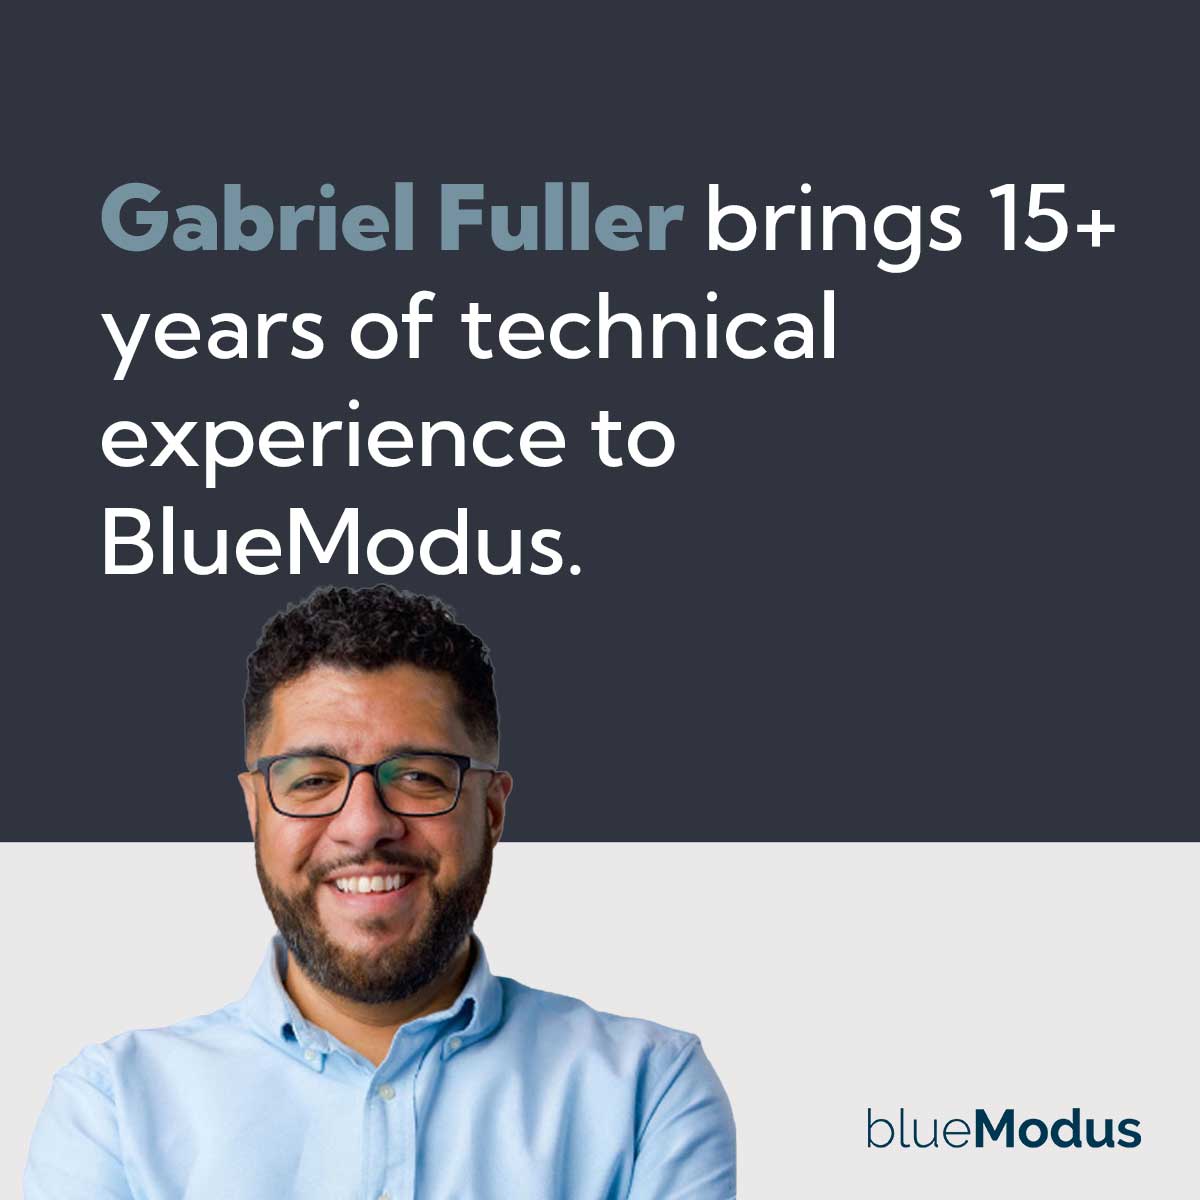 Gabriel Fuller Brings 15+ Years of Technical Experience to BlueModus